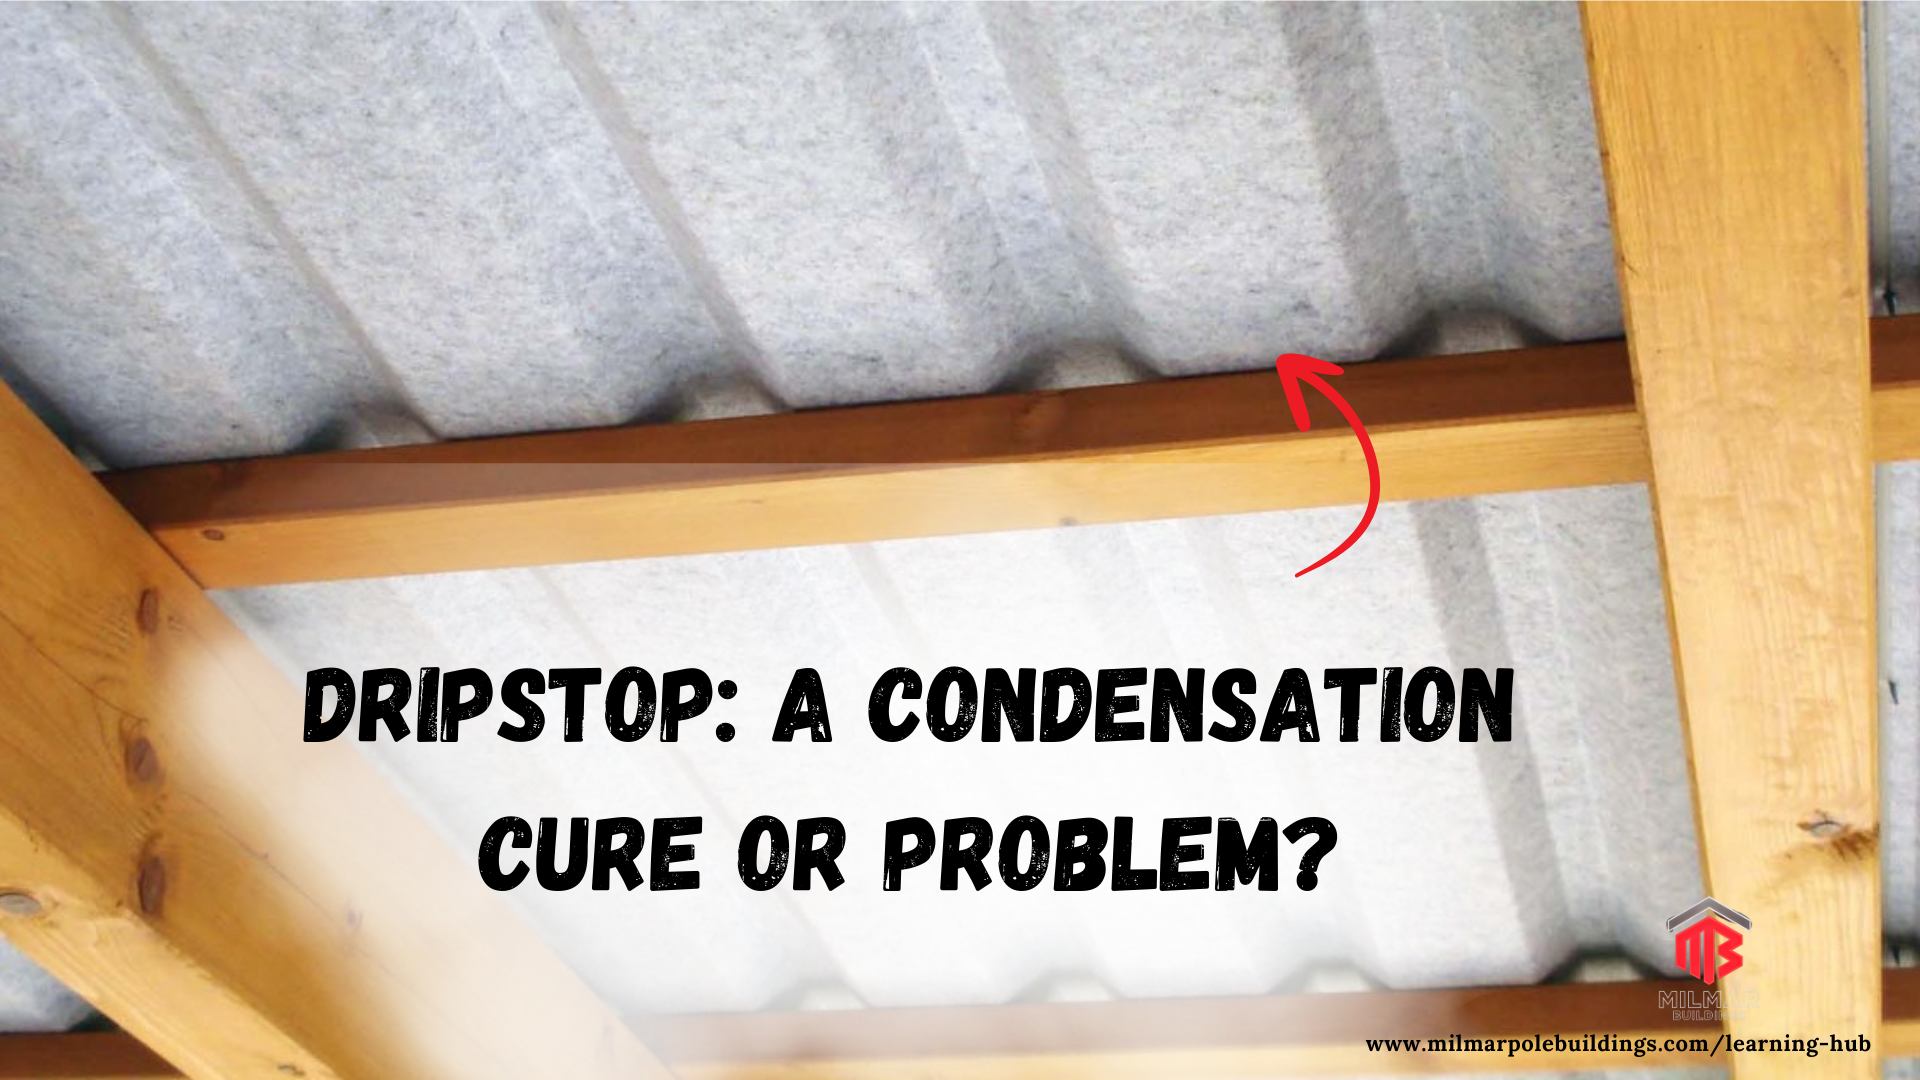 Does DripStop actually stop Condensation? - Image